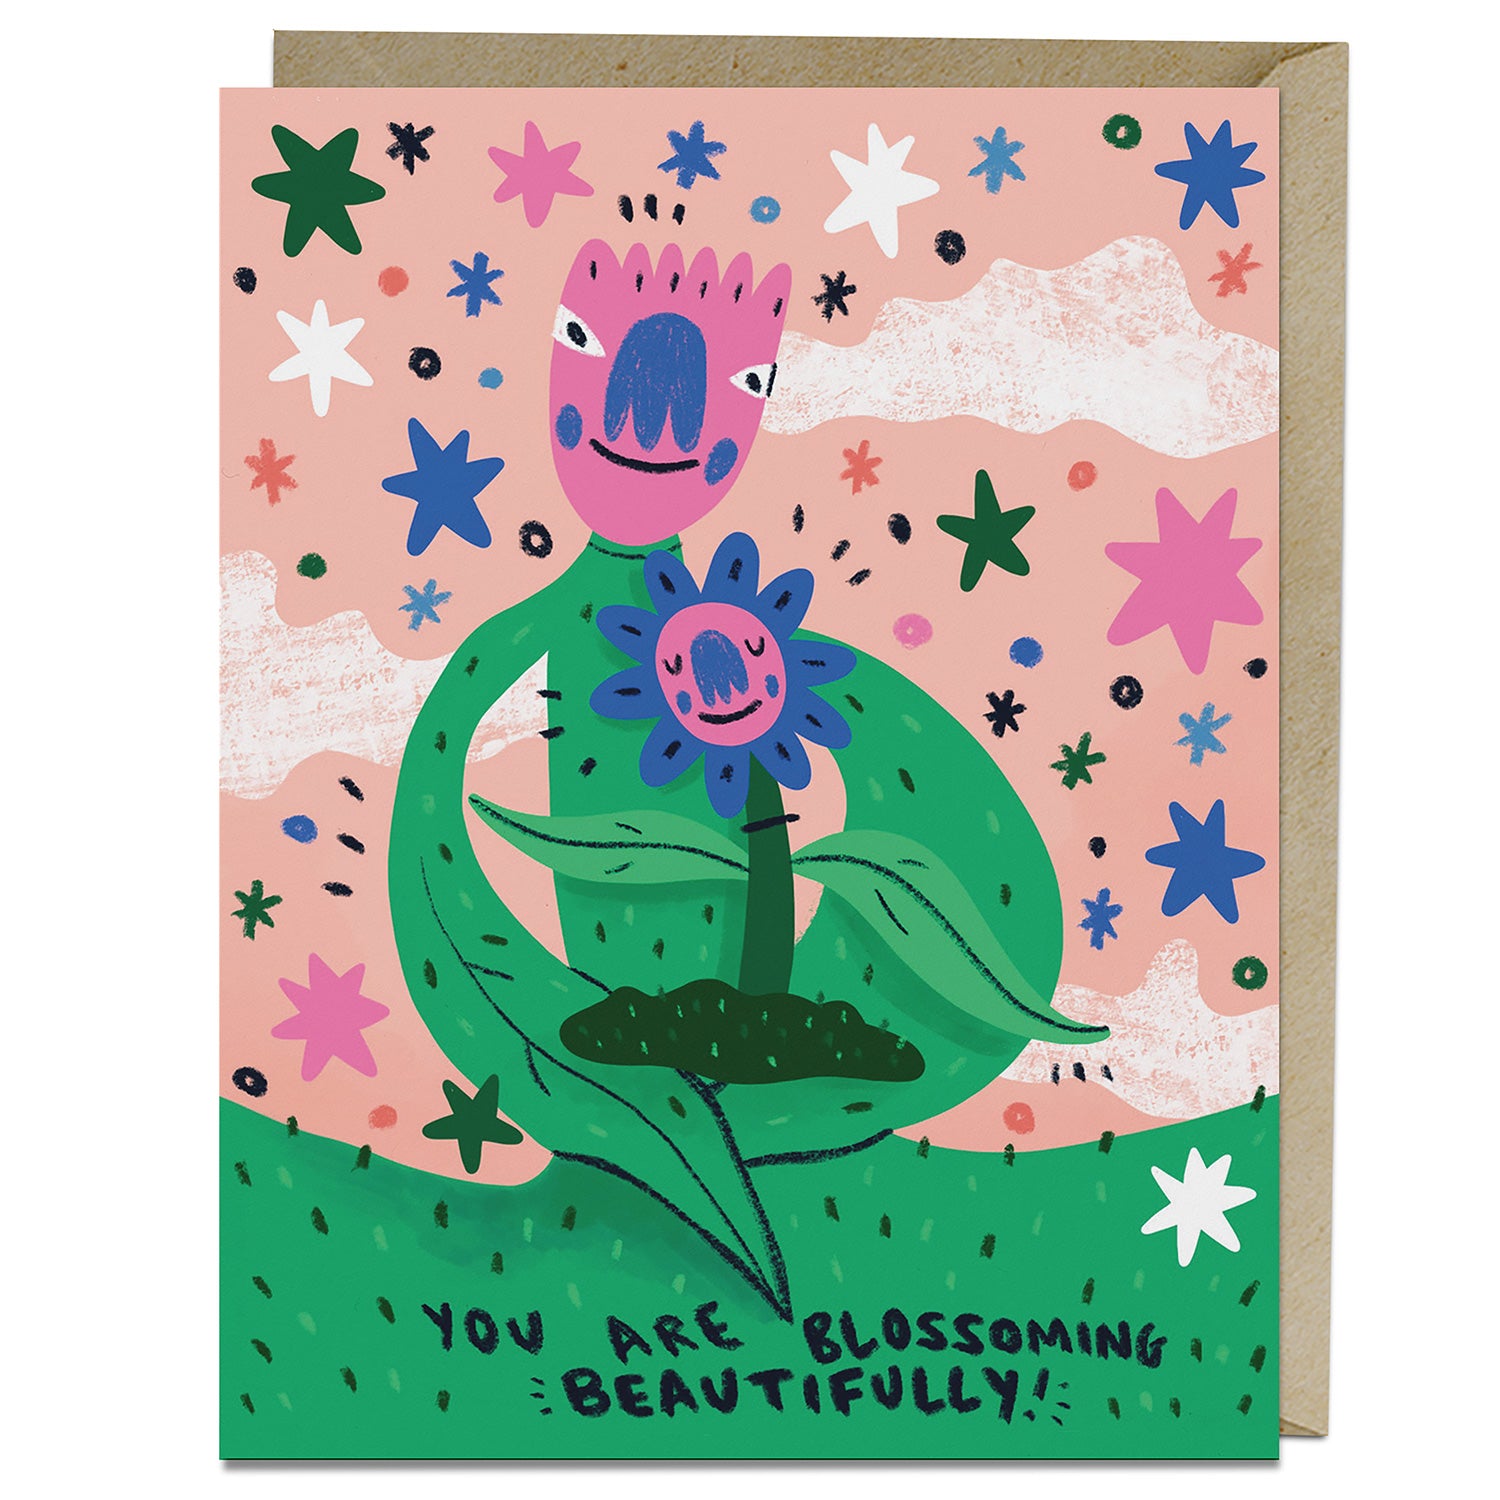 Blossoming Beautifully Encouragement Card